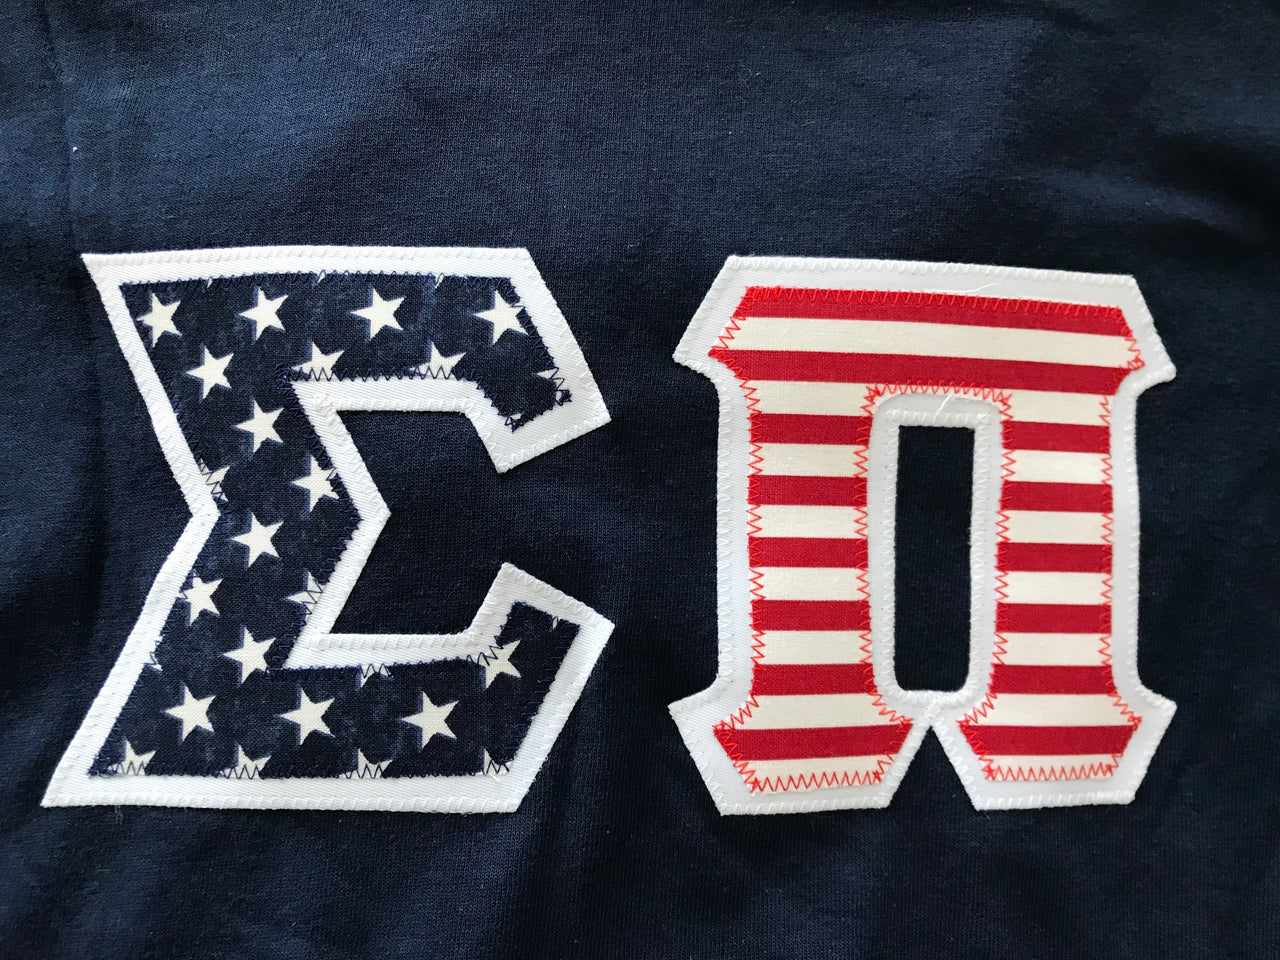 Sigma Pi Stitched Letter T-Shirt | American Flag Pattern